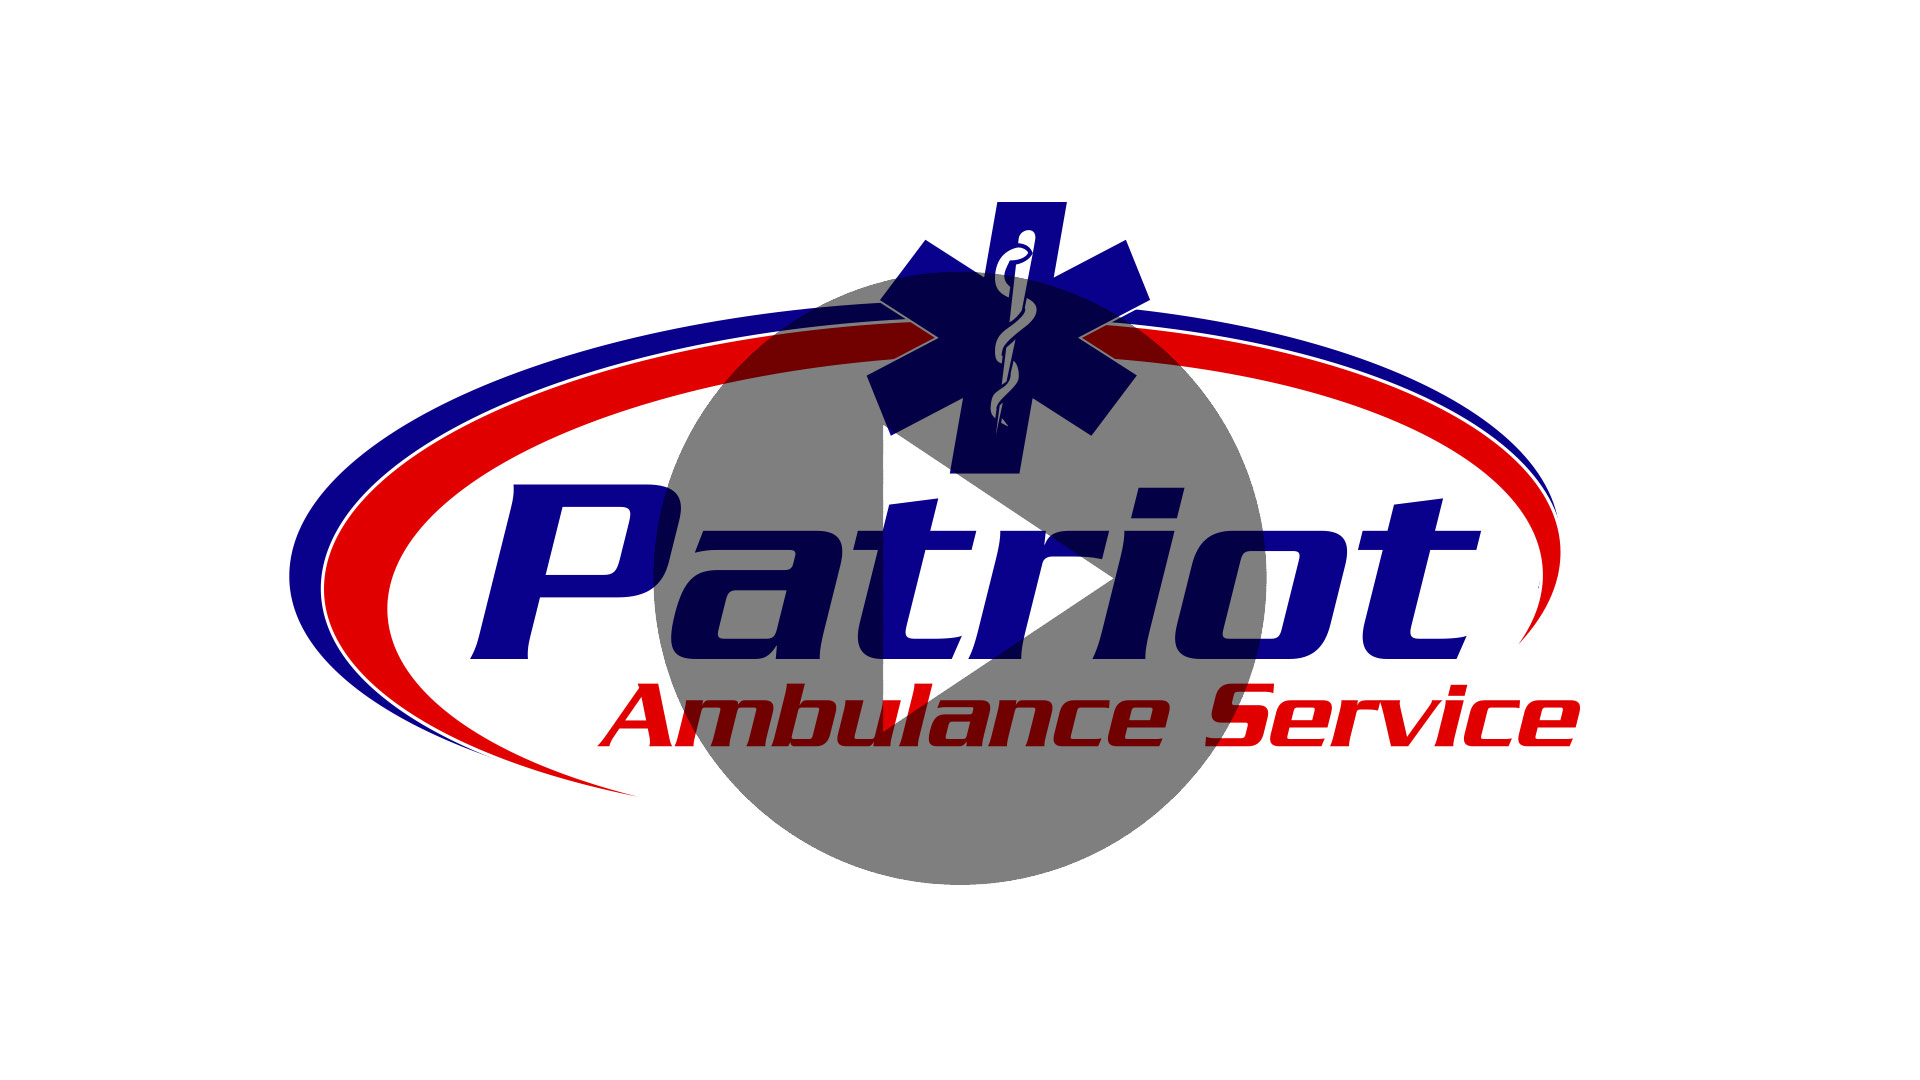 Contact us – All Town Ambulance